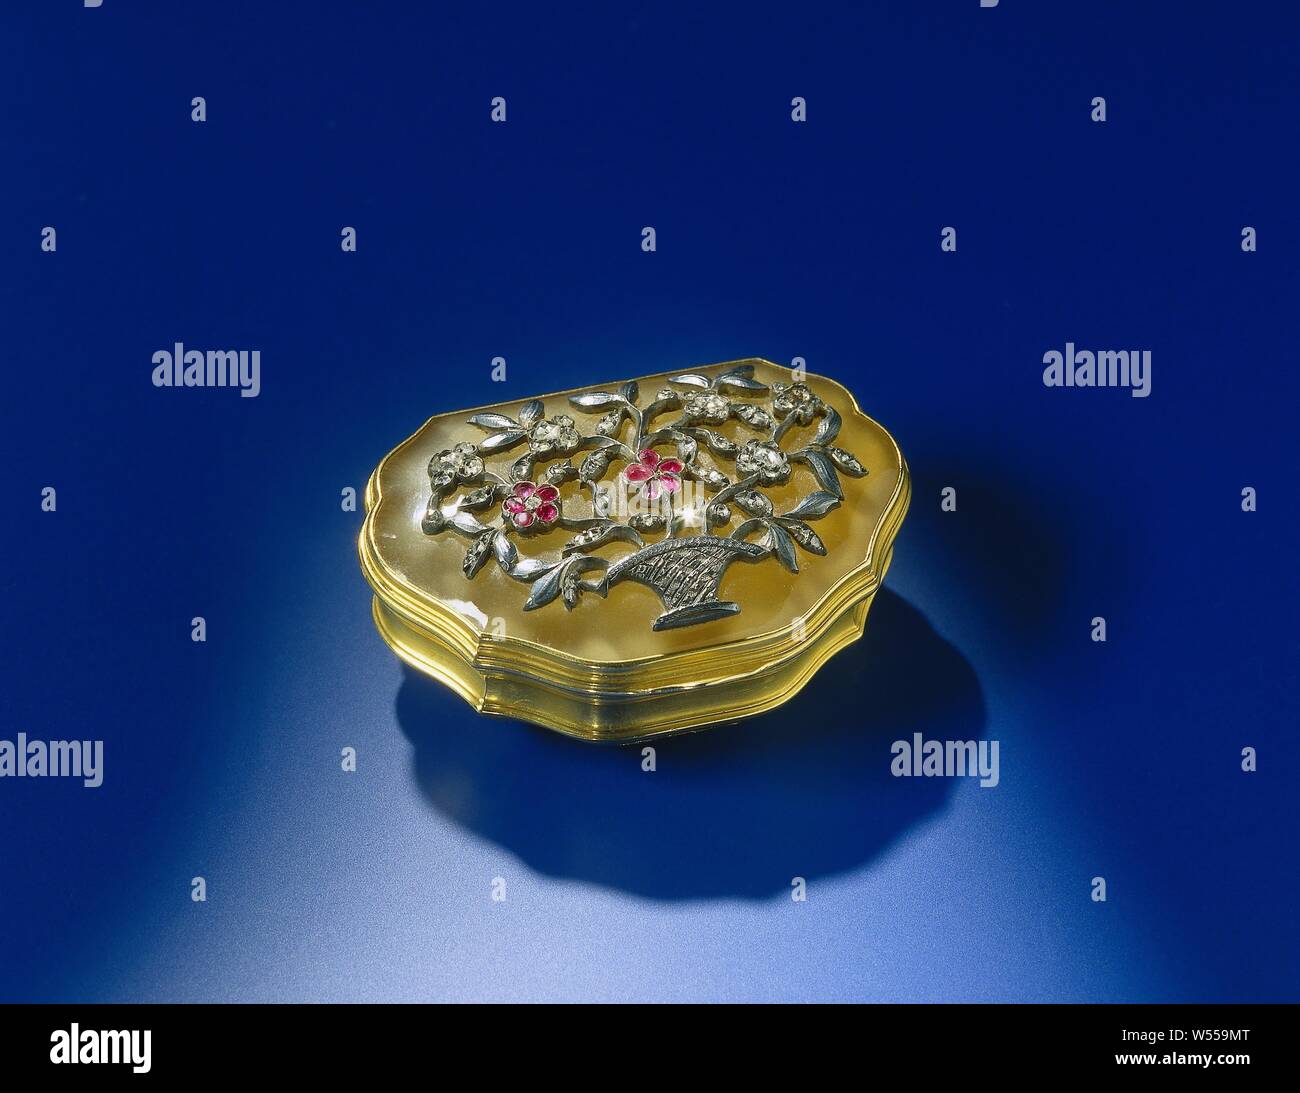 Gold snuff box with chalcedony lid. The scalloped box is decorated with a flower basket in relief of silver, with diamonds and rubies. The scalloped gold box, with a straight back, has a hinged lid. The wall of the box is articulated by a profile edge, below it is slightly convex, rejuvenating itself to the flat bottom, above it is slightly strapped. On the convex part it is engraved on the front with a flower basket. the lid is made of chalcedony, mounted in a raised tab. It has an imposed decoration of a cast silver flower basket, with horrified and engraved details, set with diamonds Stock Photo